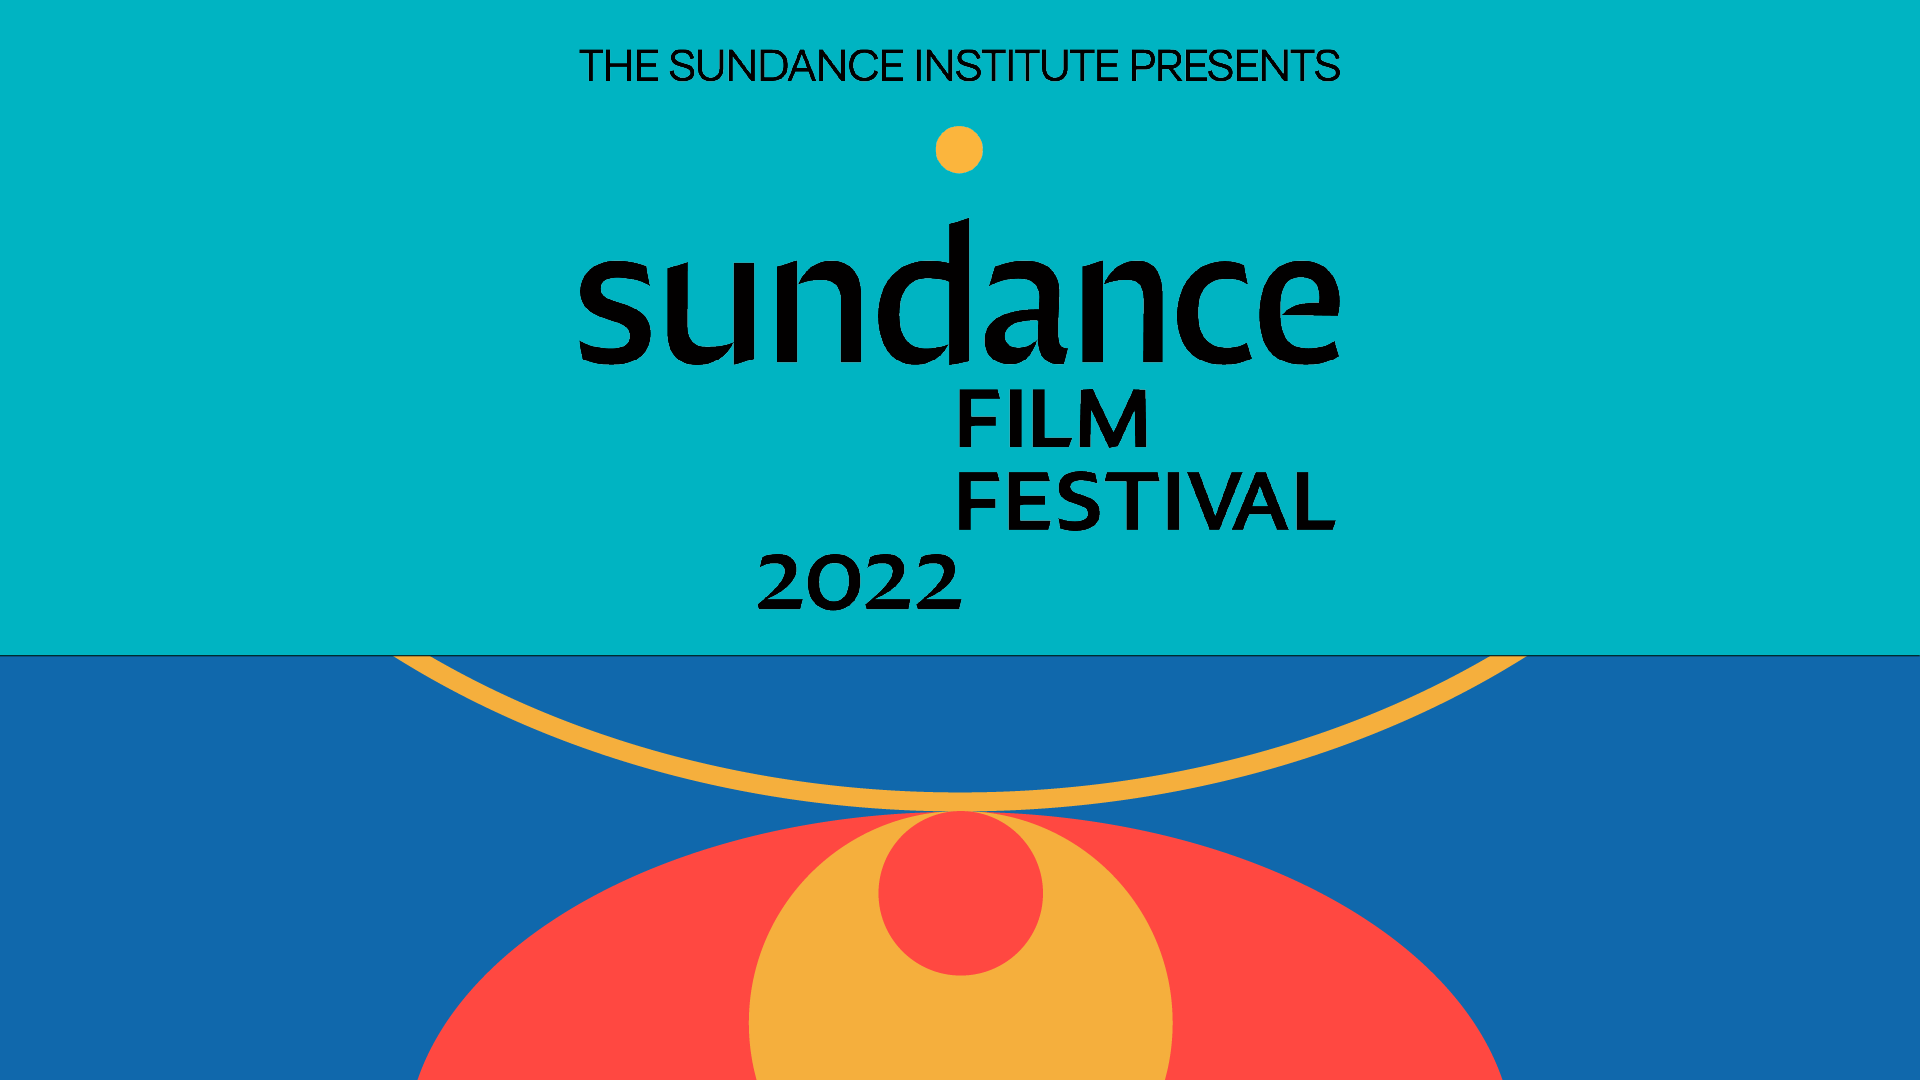 You can look here for SLUG Magazine's latest reviews of films at the 2022 Sundance Film Festival, which runs Jan. 20–Jan. 30.